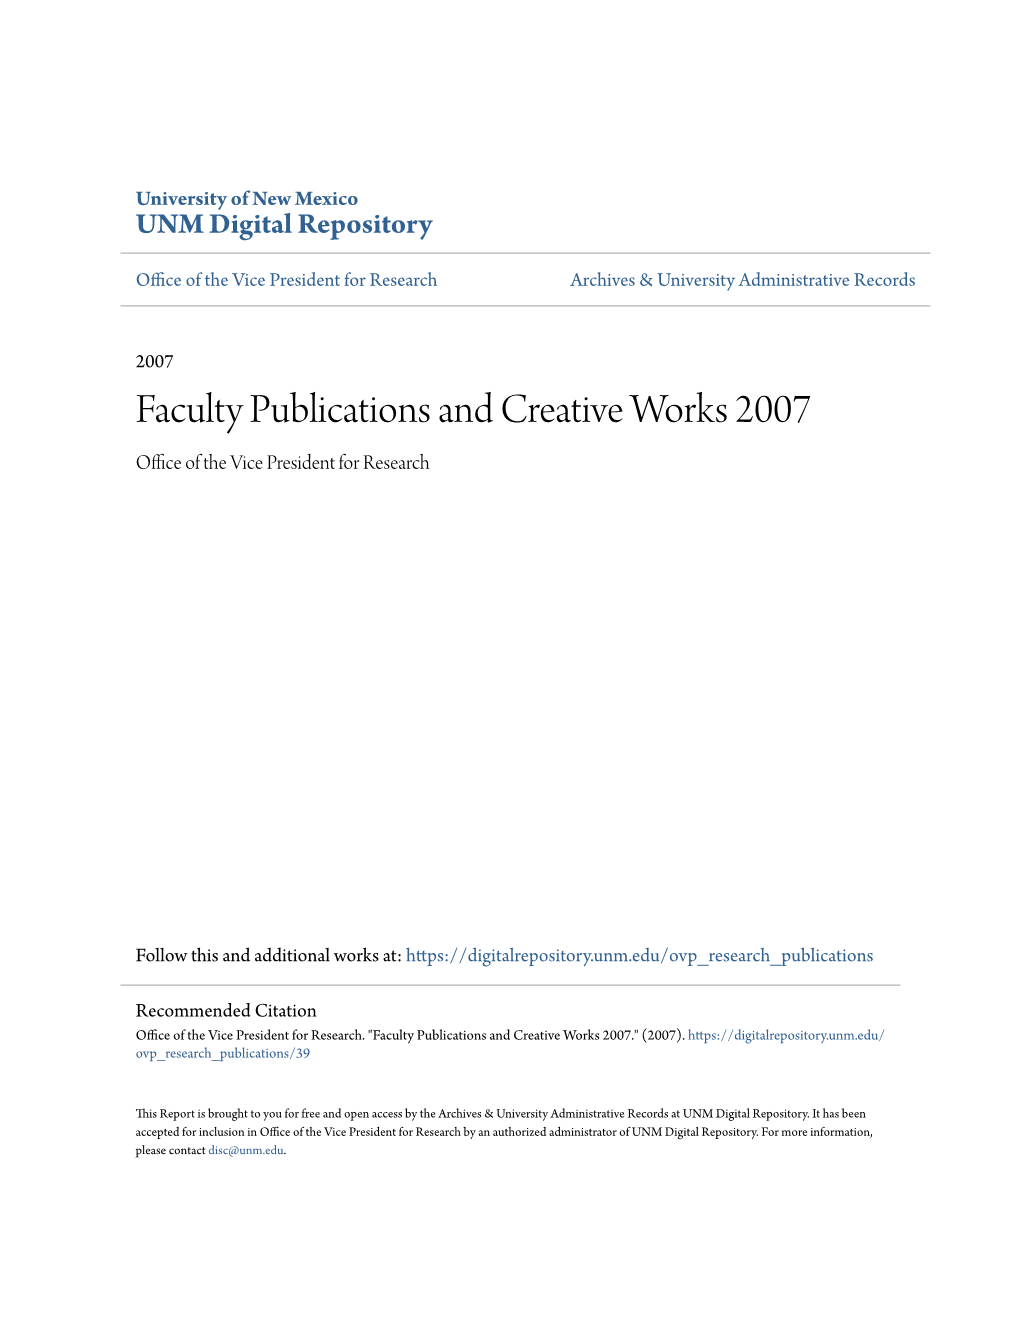 Faculty Publications and Creative Works 2007 Office of Theice V President for Research